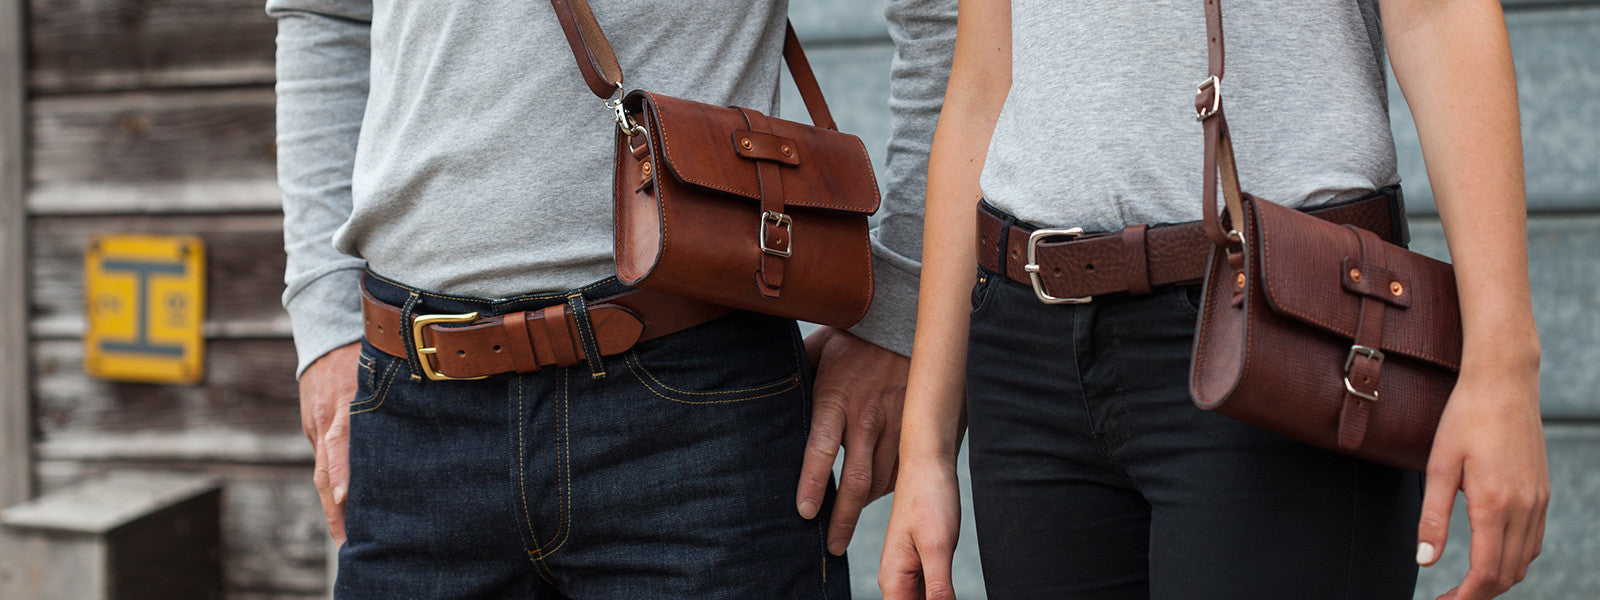 Lined Bags Vs Unlined Leather Bags — The Handmade Store